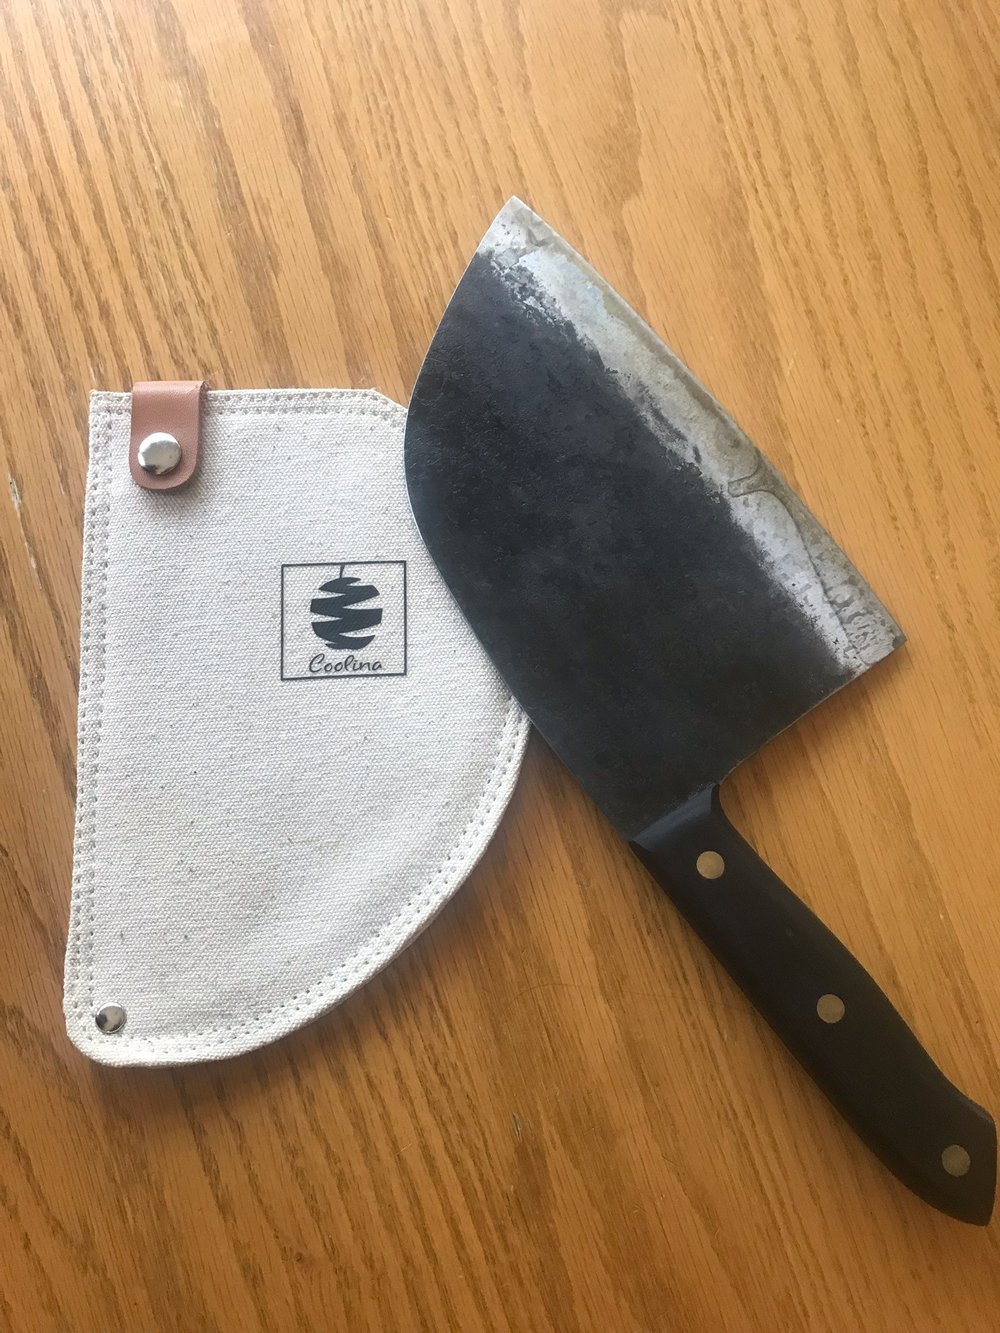 Meaningful Gift Ideas — The Other Side of the Spatula